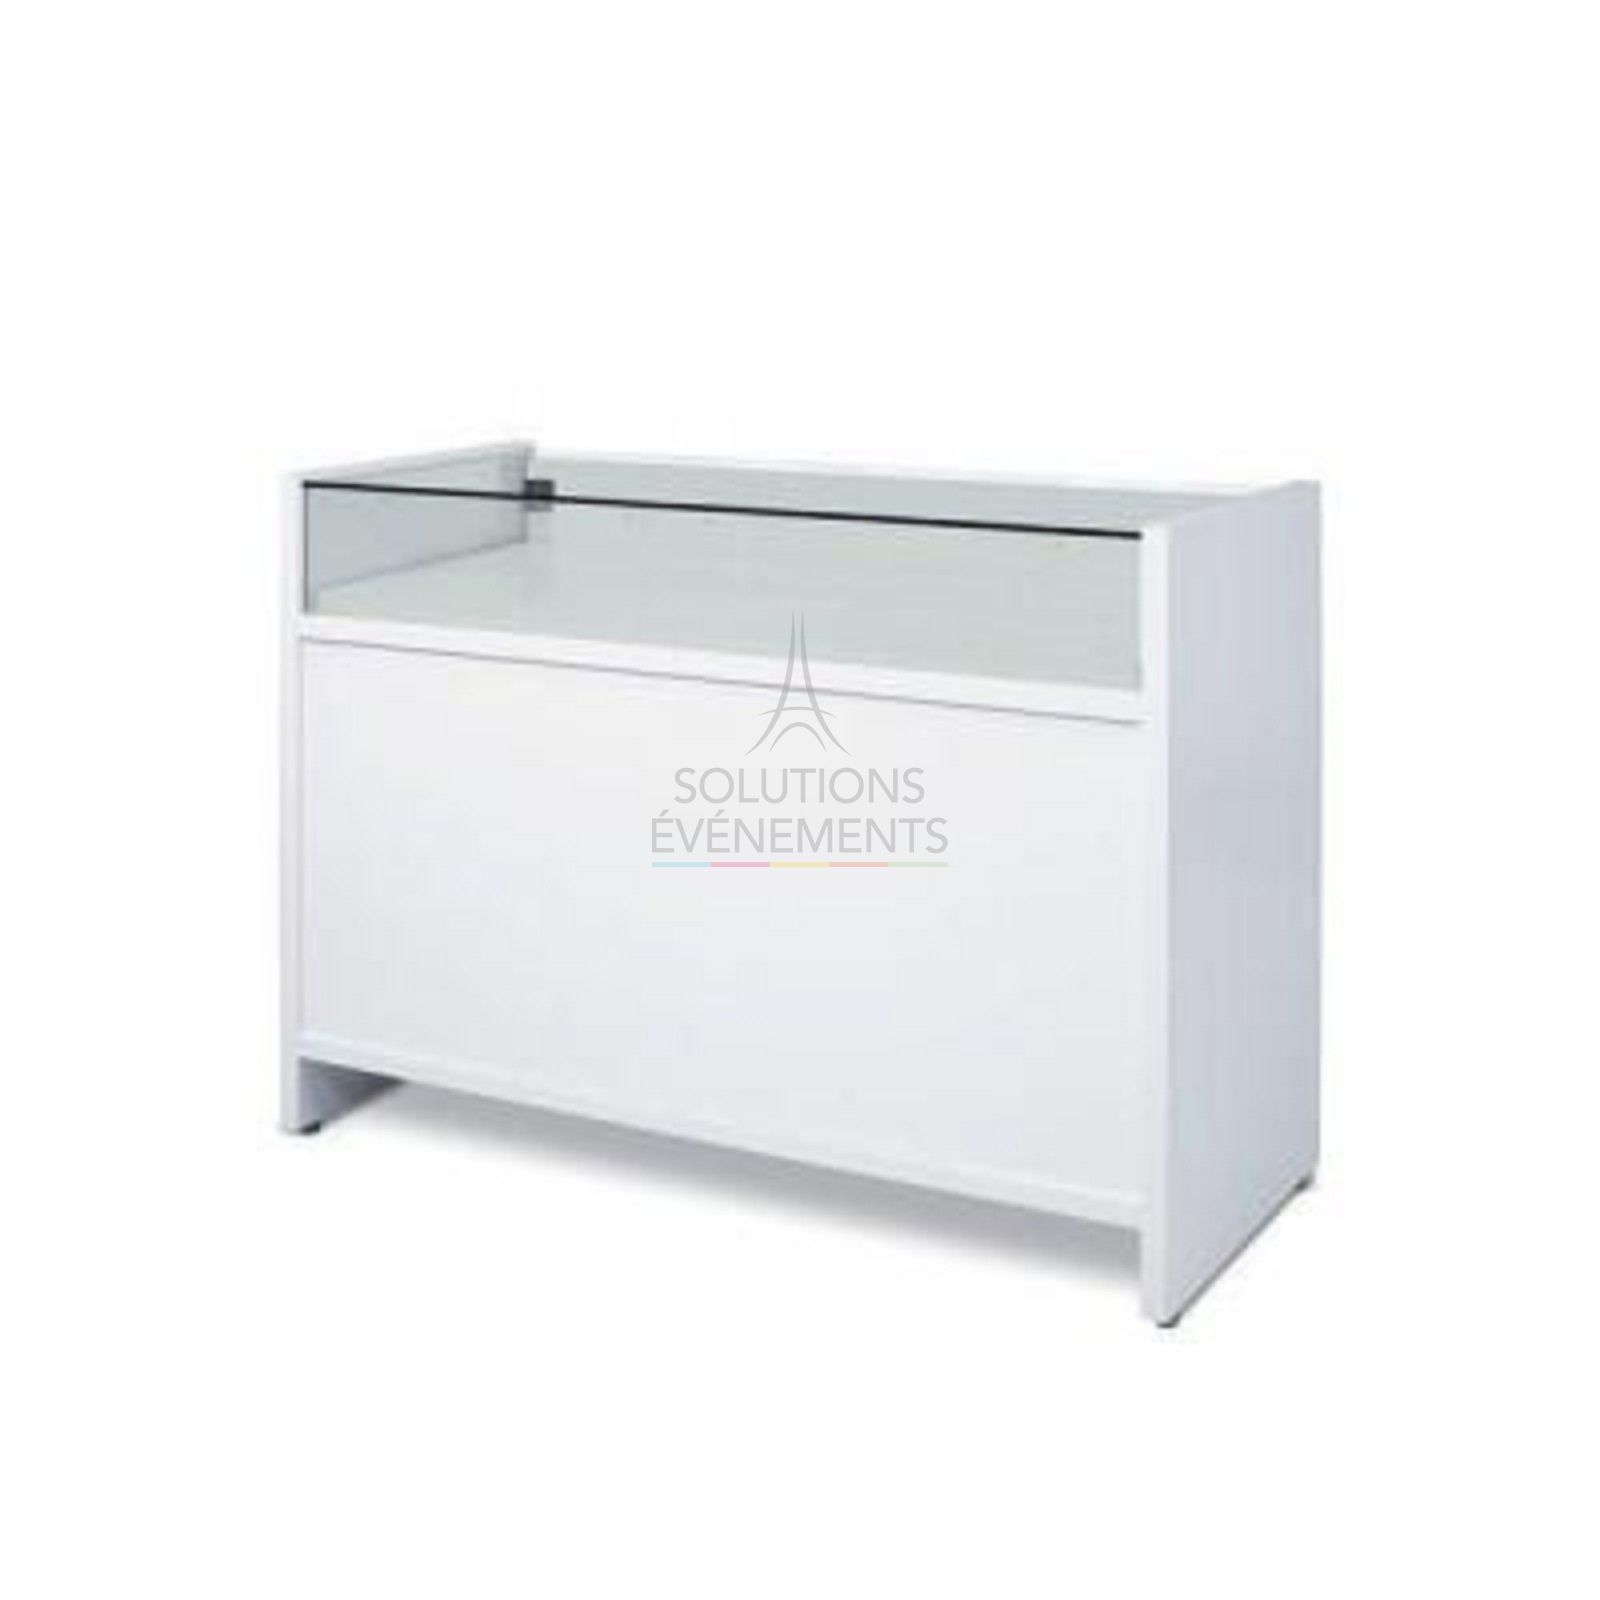 Rental of a counter with white display case